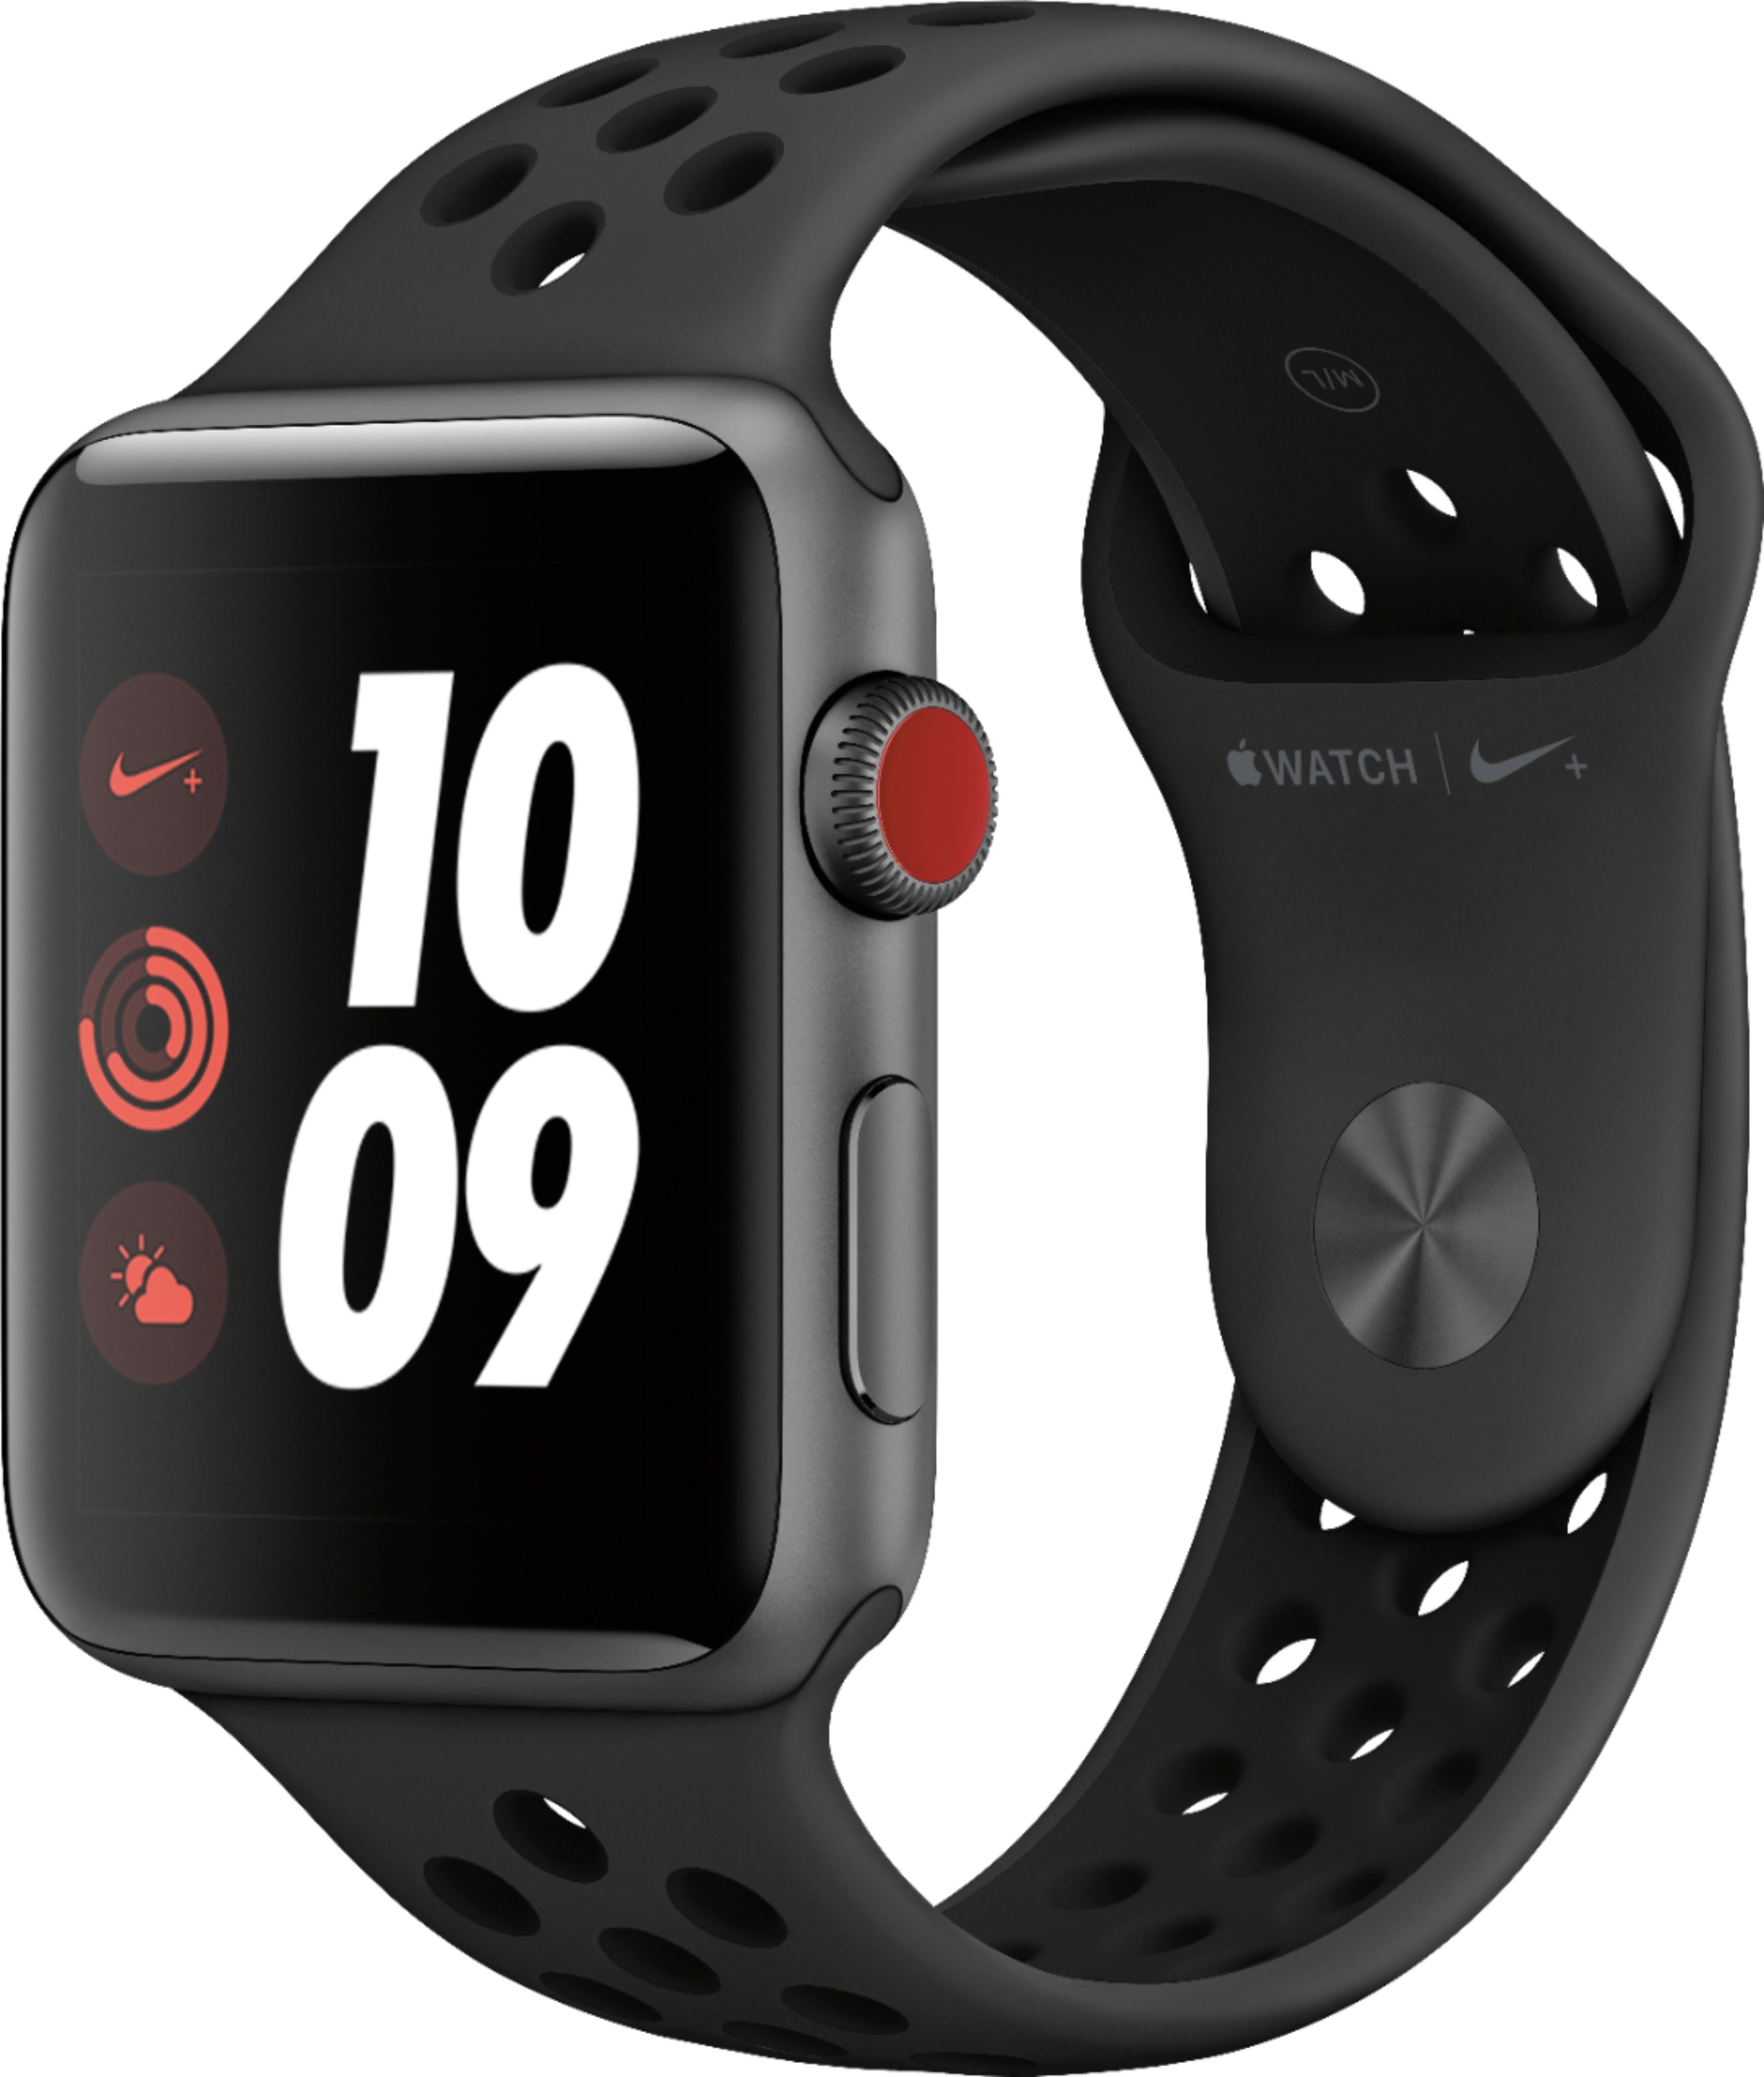 Rate Of Apple Watch Series 3 Clearance, 57% OFF | www 